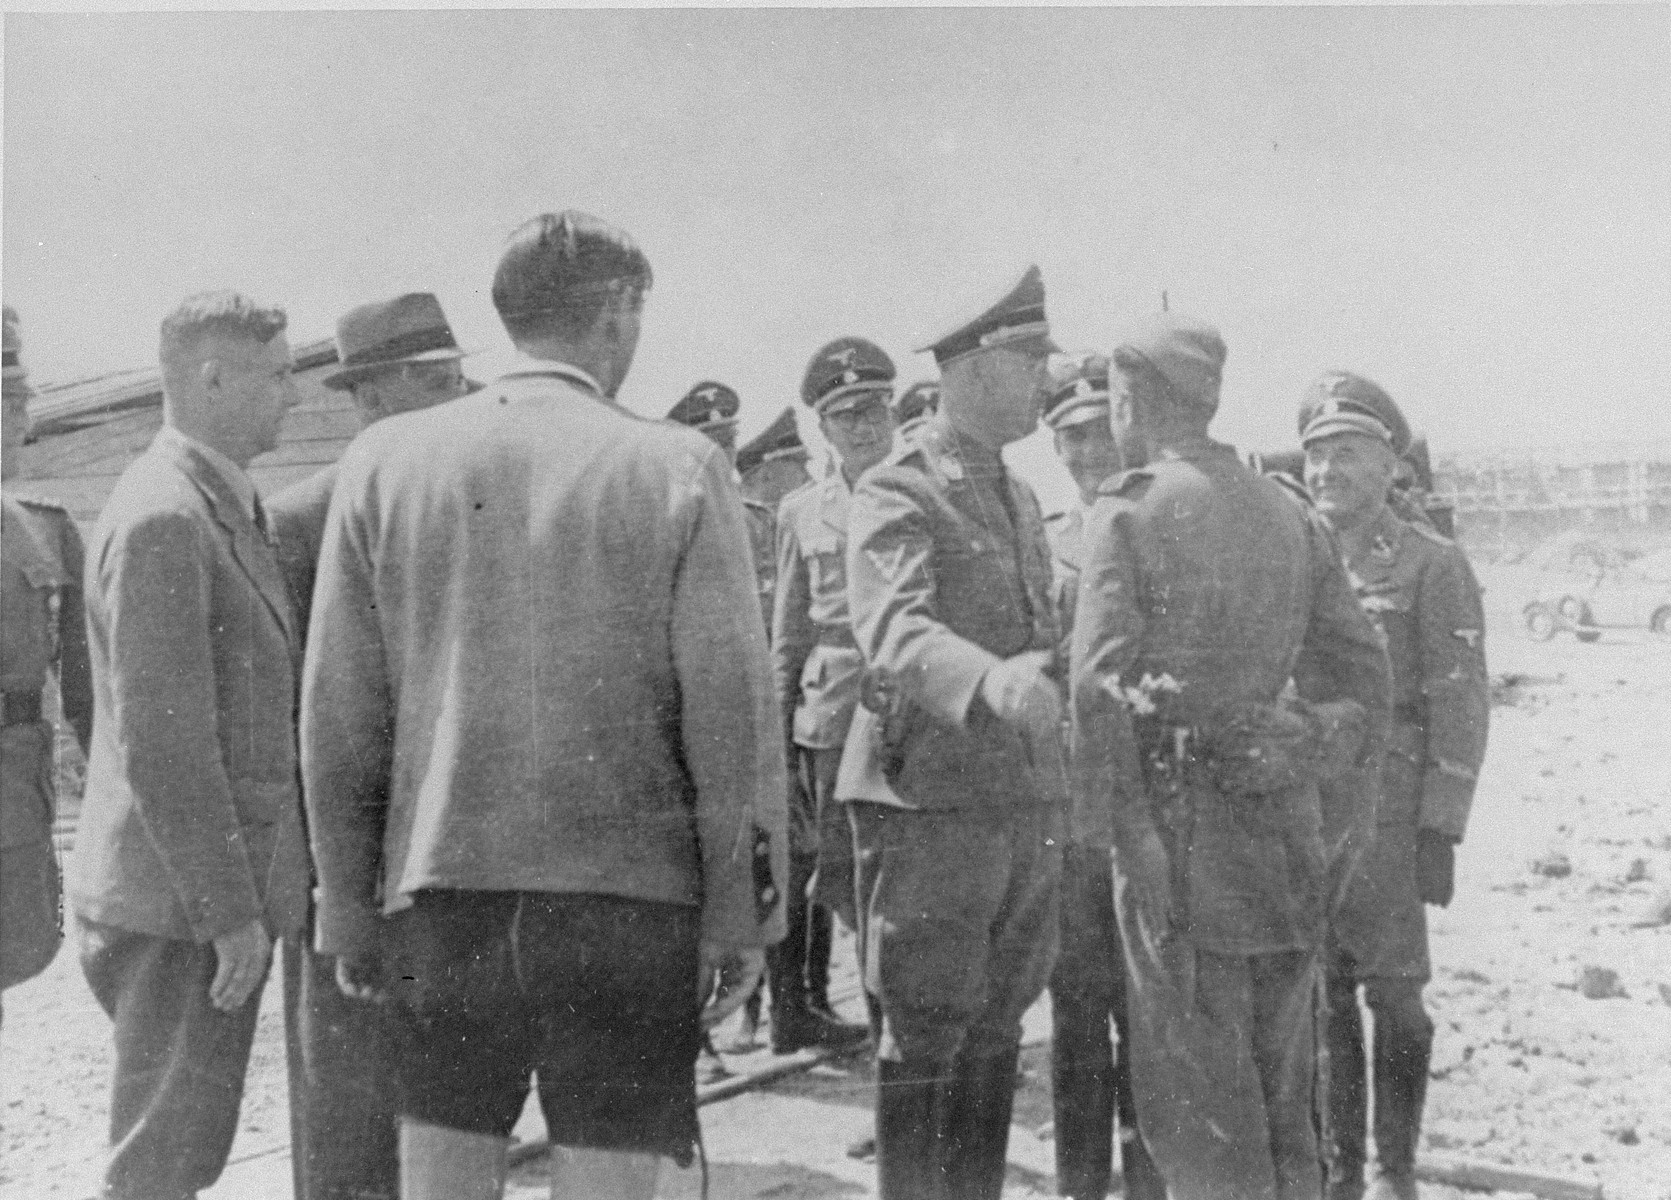 During a tour of the Monowitz-Buna building site, Reichsfuehrer SS Heinrich Himmler speaks to a member of the SS who is supervising the prisoners working on the construction of the IG Farben plant.